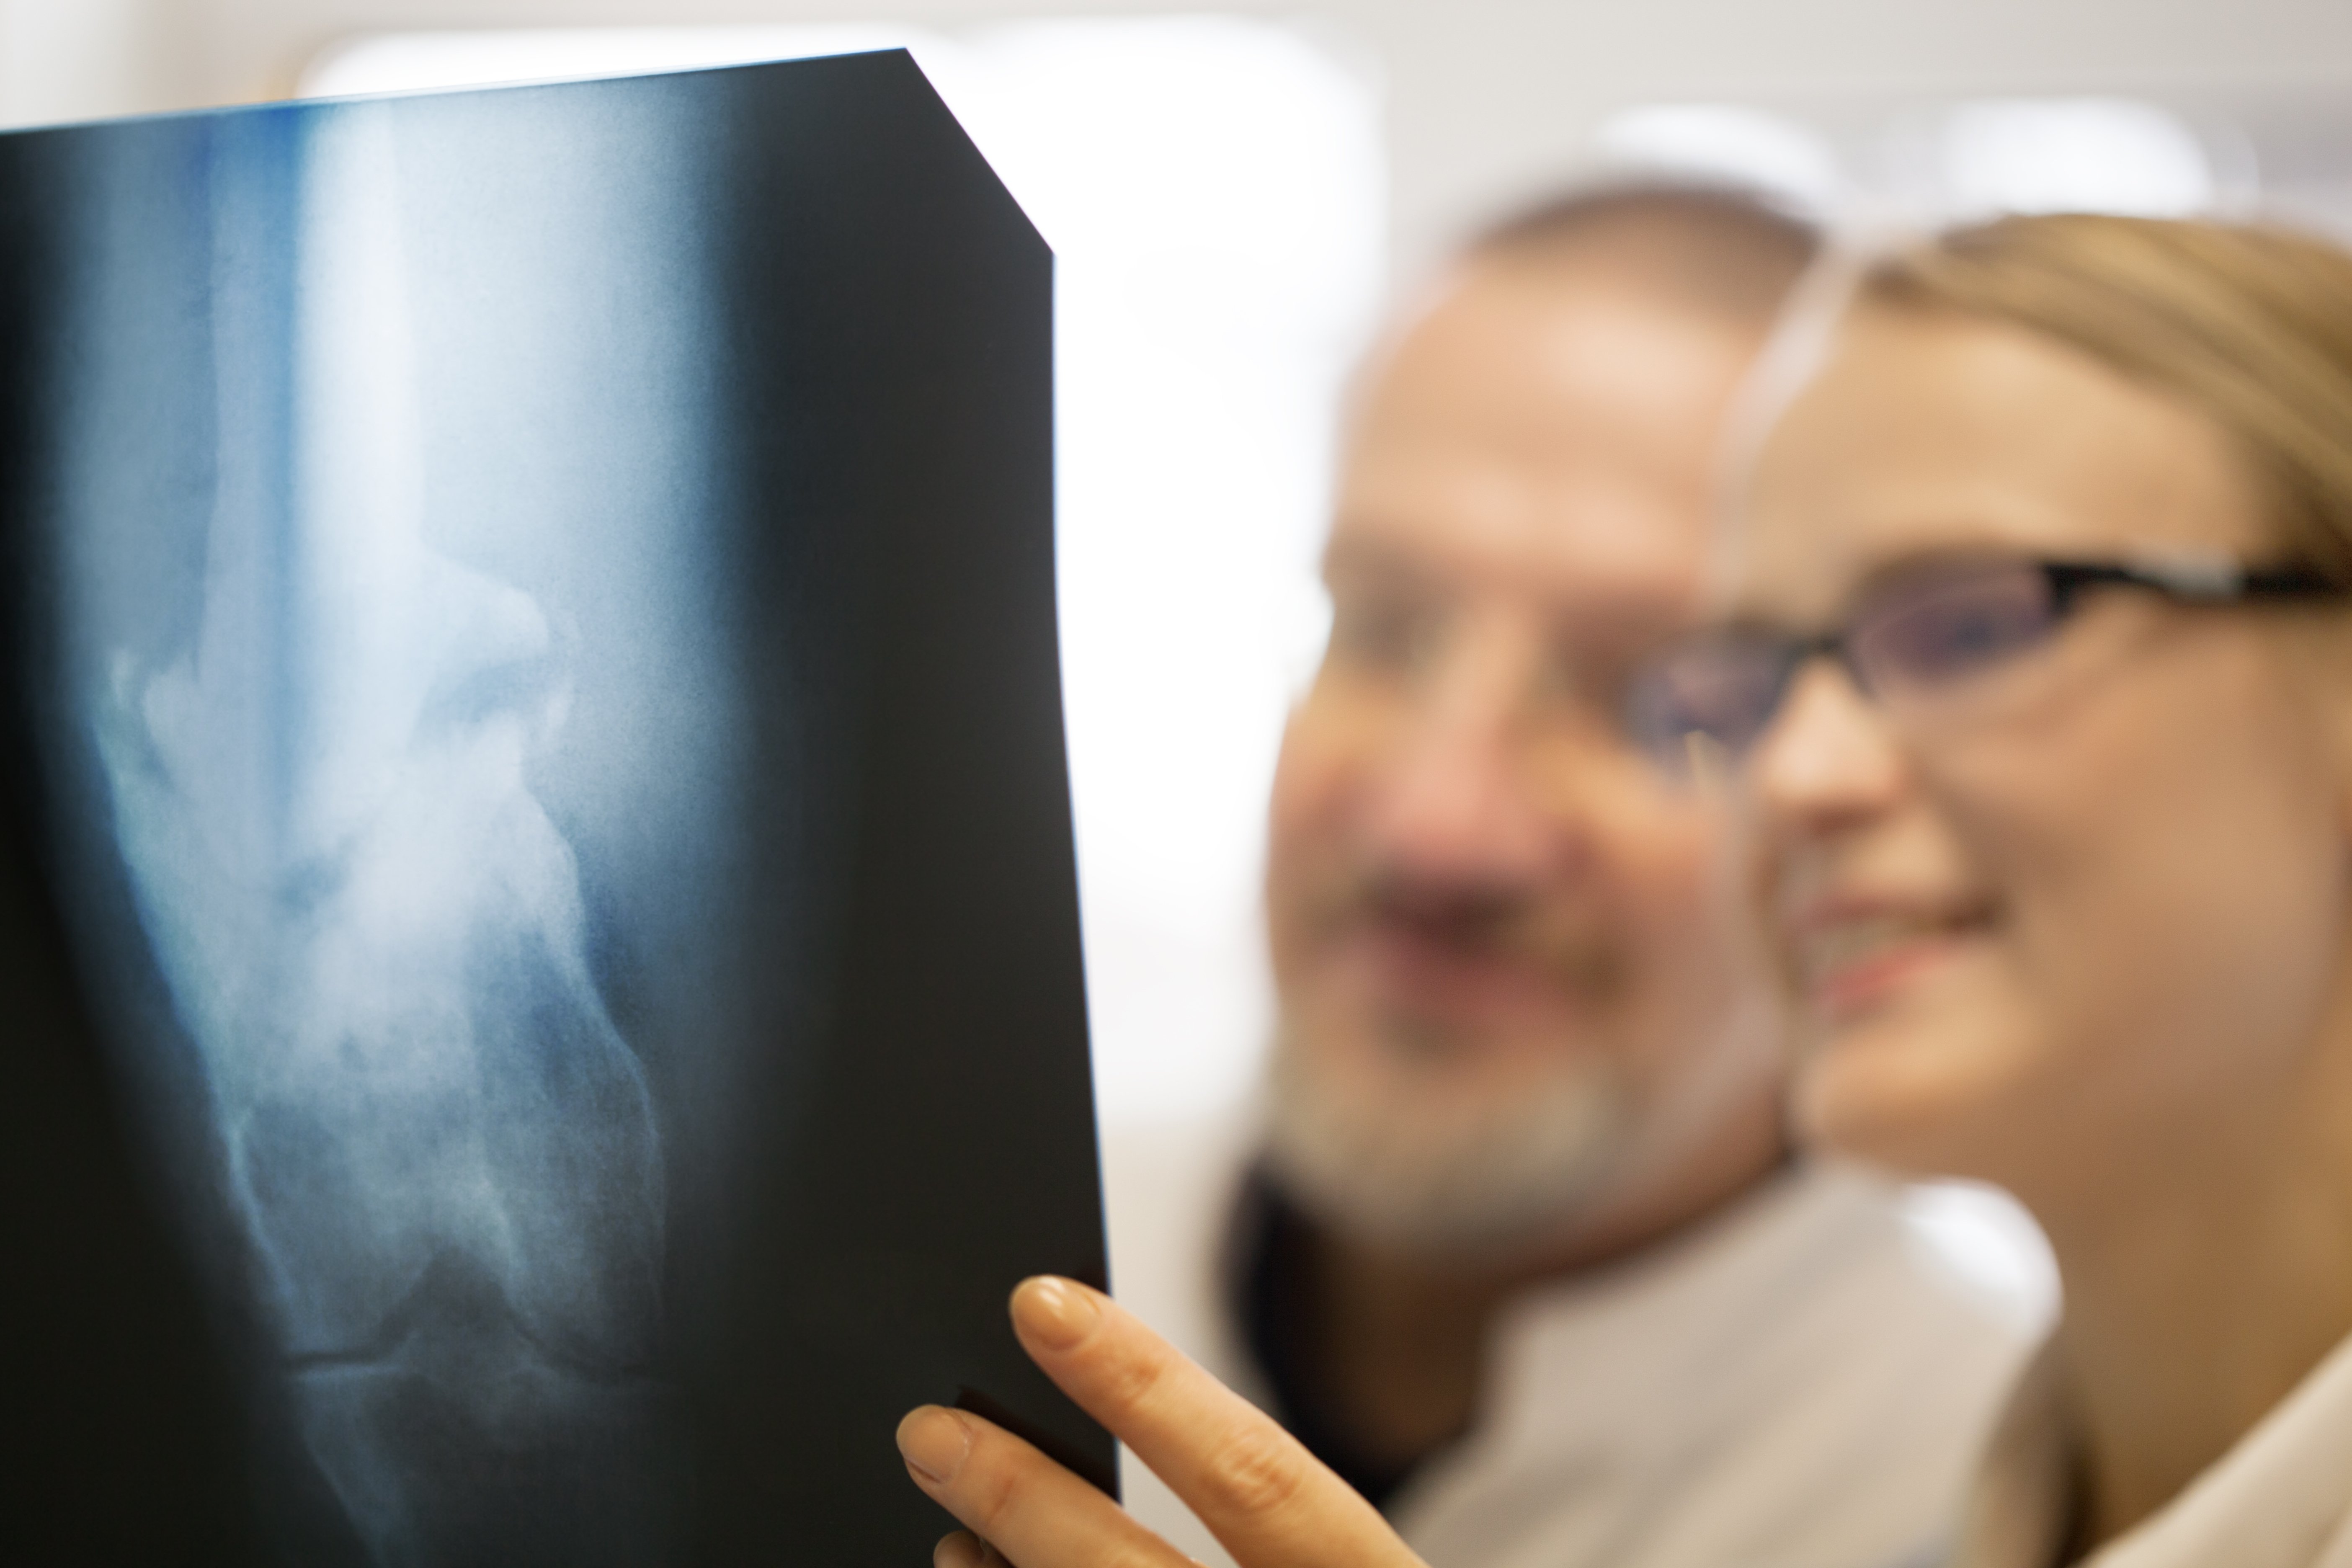 doctors-making-a-diagnosis-using-x-ray-images-SBI-300939041